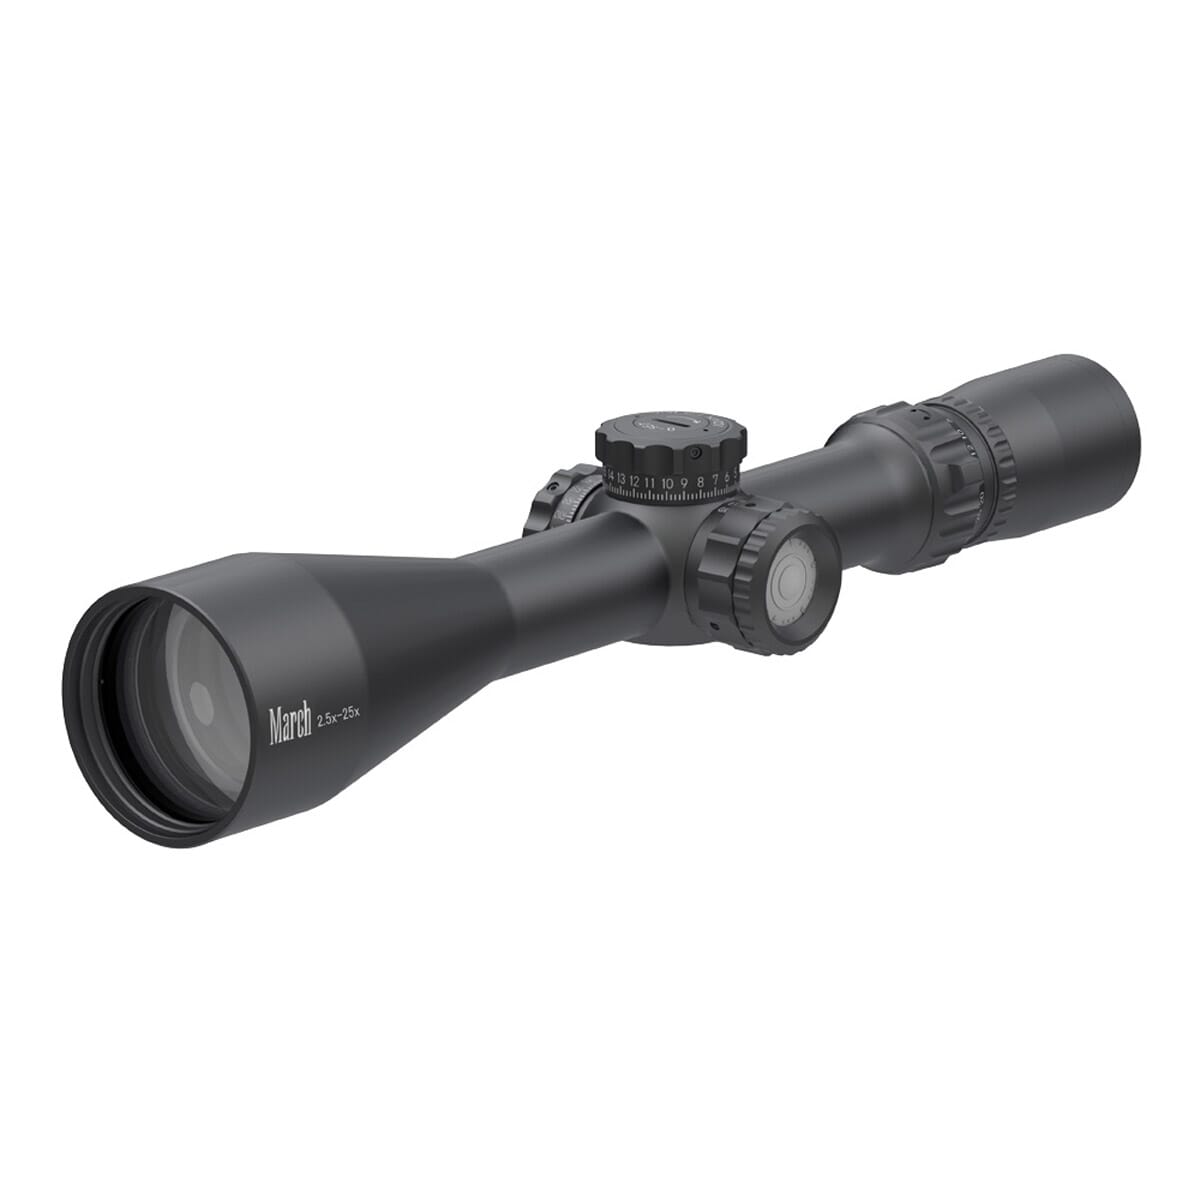 March Compact Tactical 2.5-25x52mm MTR-1 Reticle 1/4MOA Illuminated Riflescope D25V52TI-MTR-1-800064